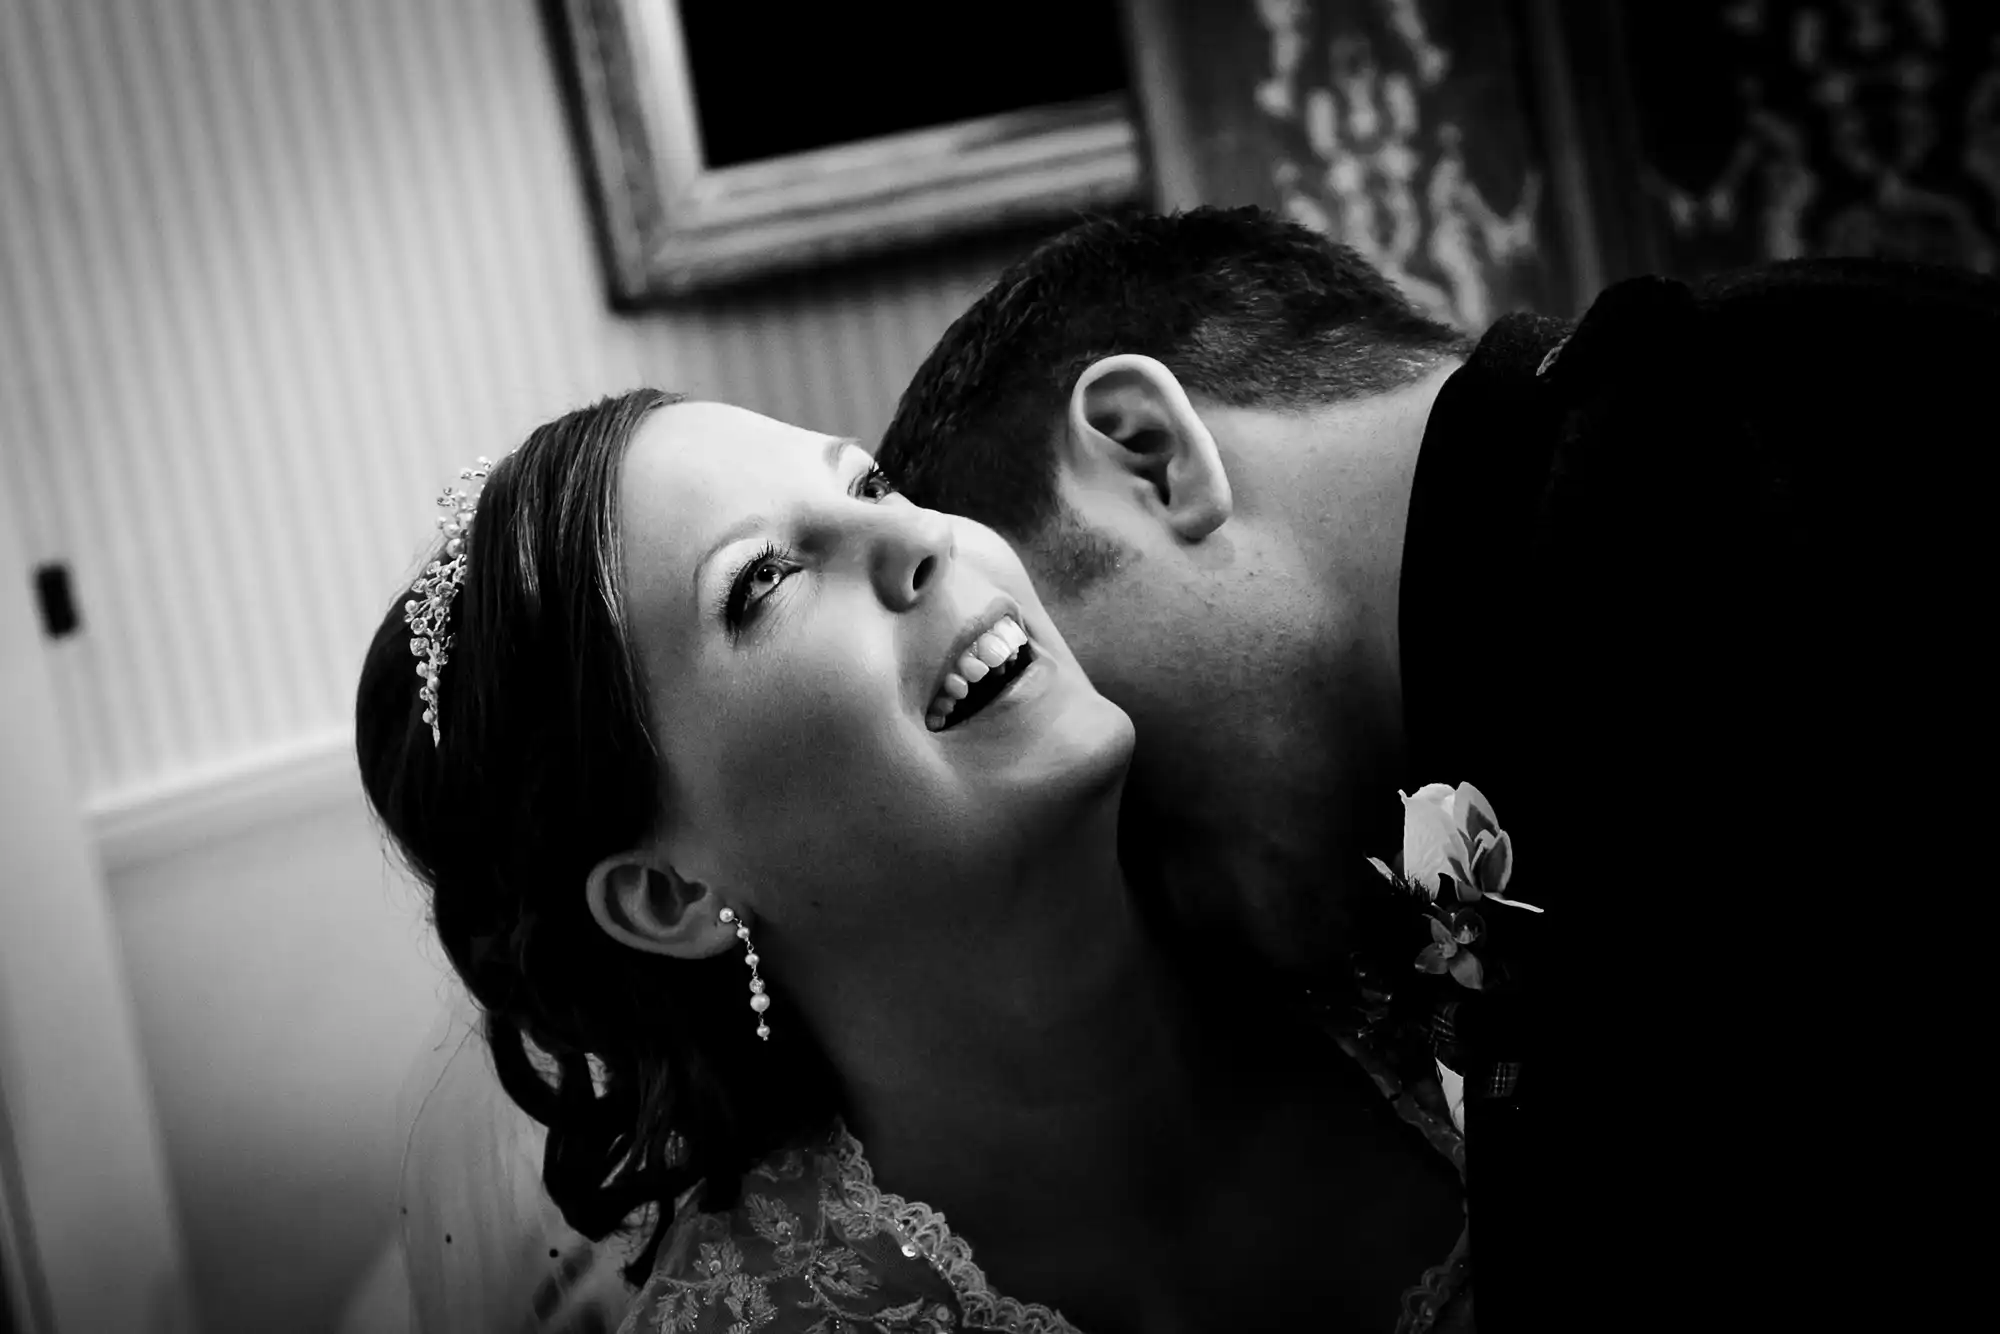 Black and white photo of a bride smiling at her groom as he whispers in her ear, both dressed in wedding attire.